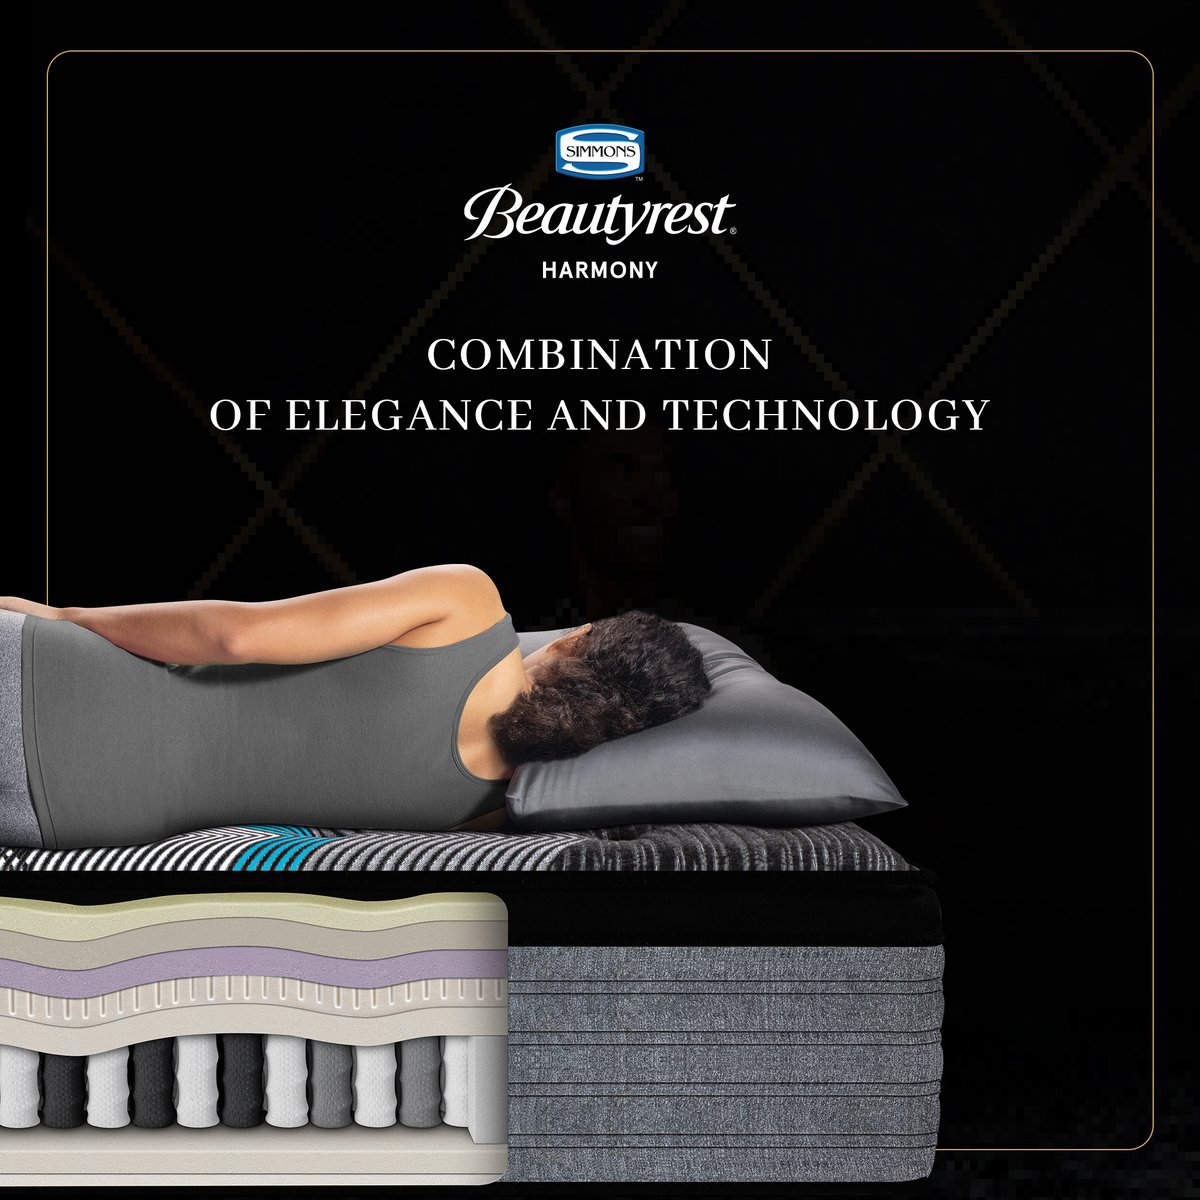 The #Harmonymattress has innovative #technology & materials for pressure-relieving #comfort & tailored #support for a cosy #sleep experience.

Visit simmonsbeautyrest.in/products/harmo…

#Stylish #Simmons #Simmonsbeautyrestindia #beautyrest #simmonsbeautyrest #VFI #Mattress #Luxuriousmattress